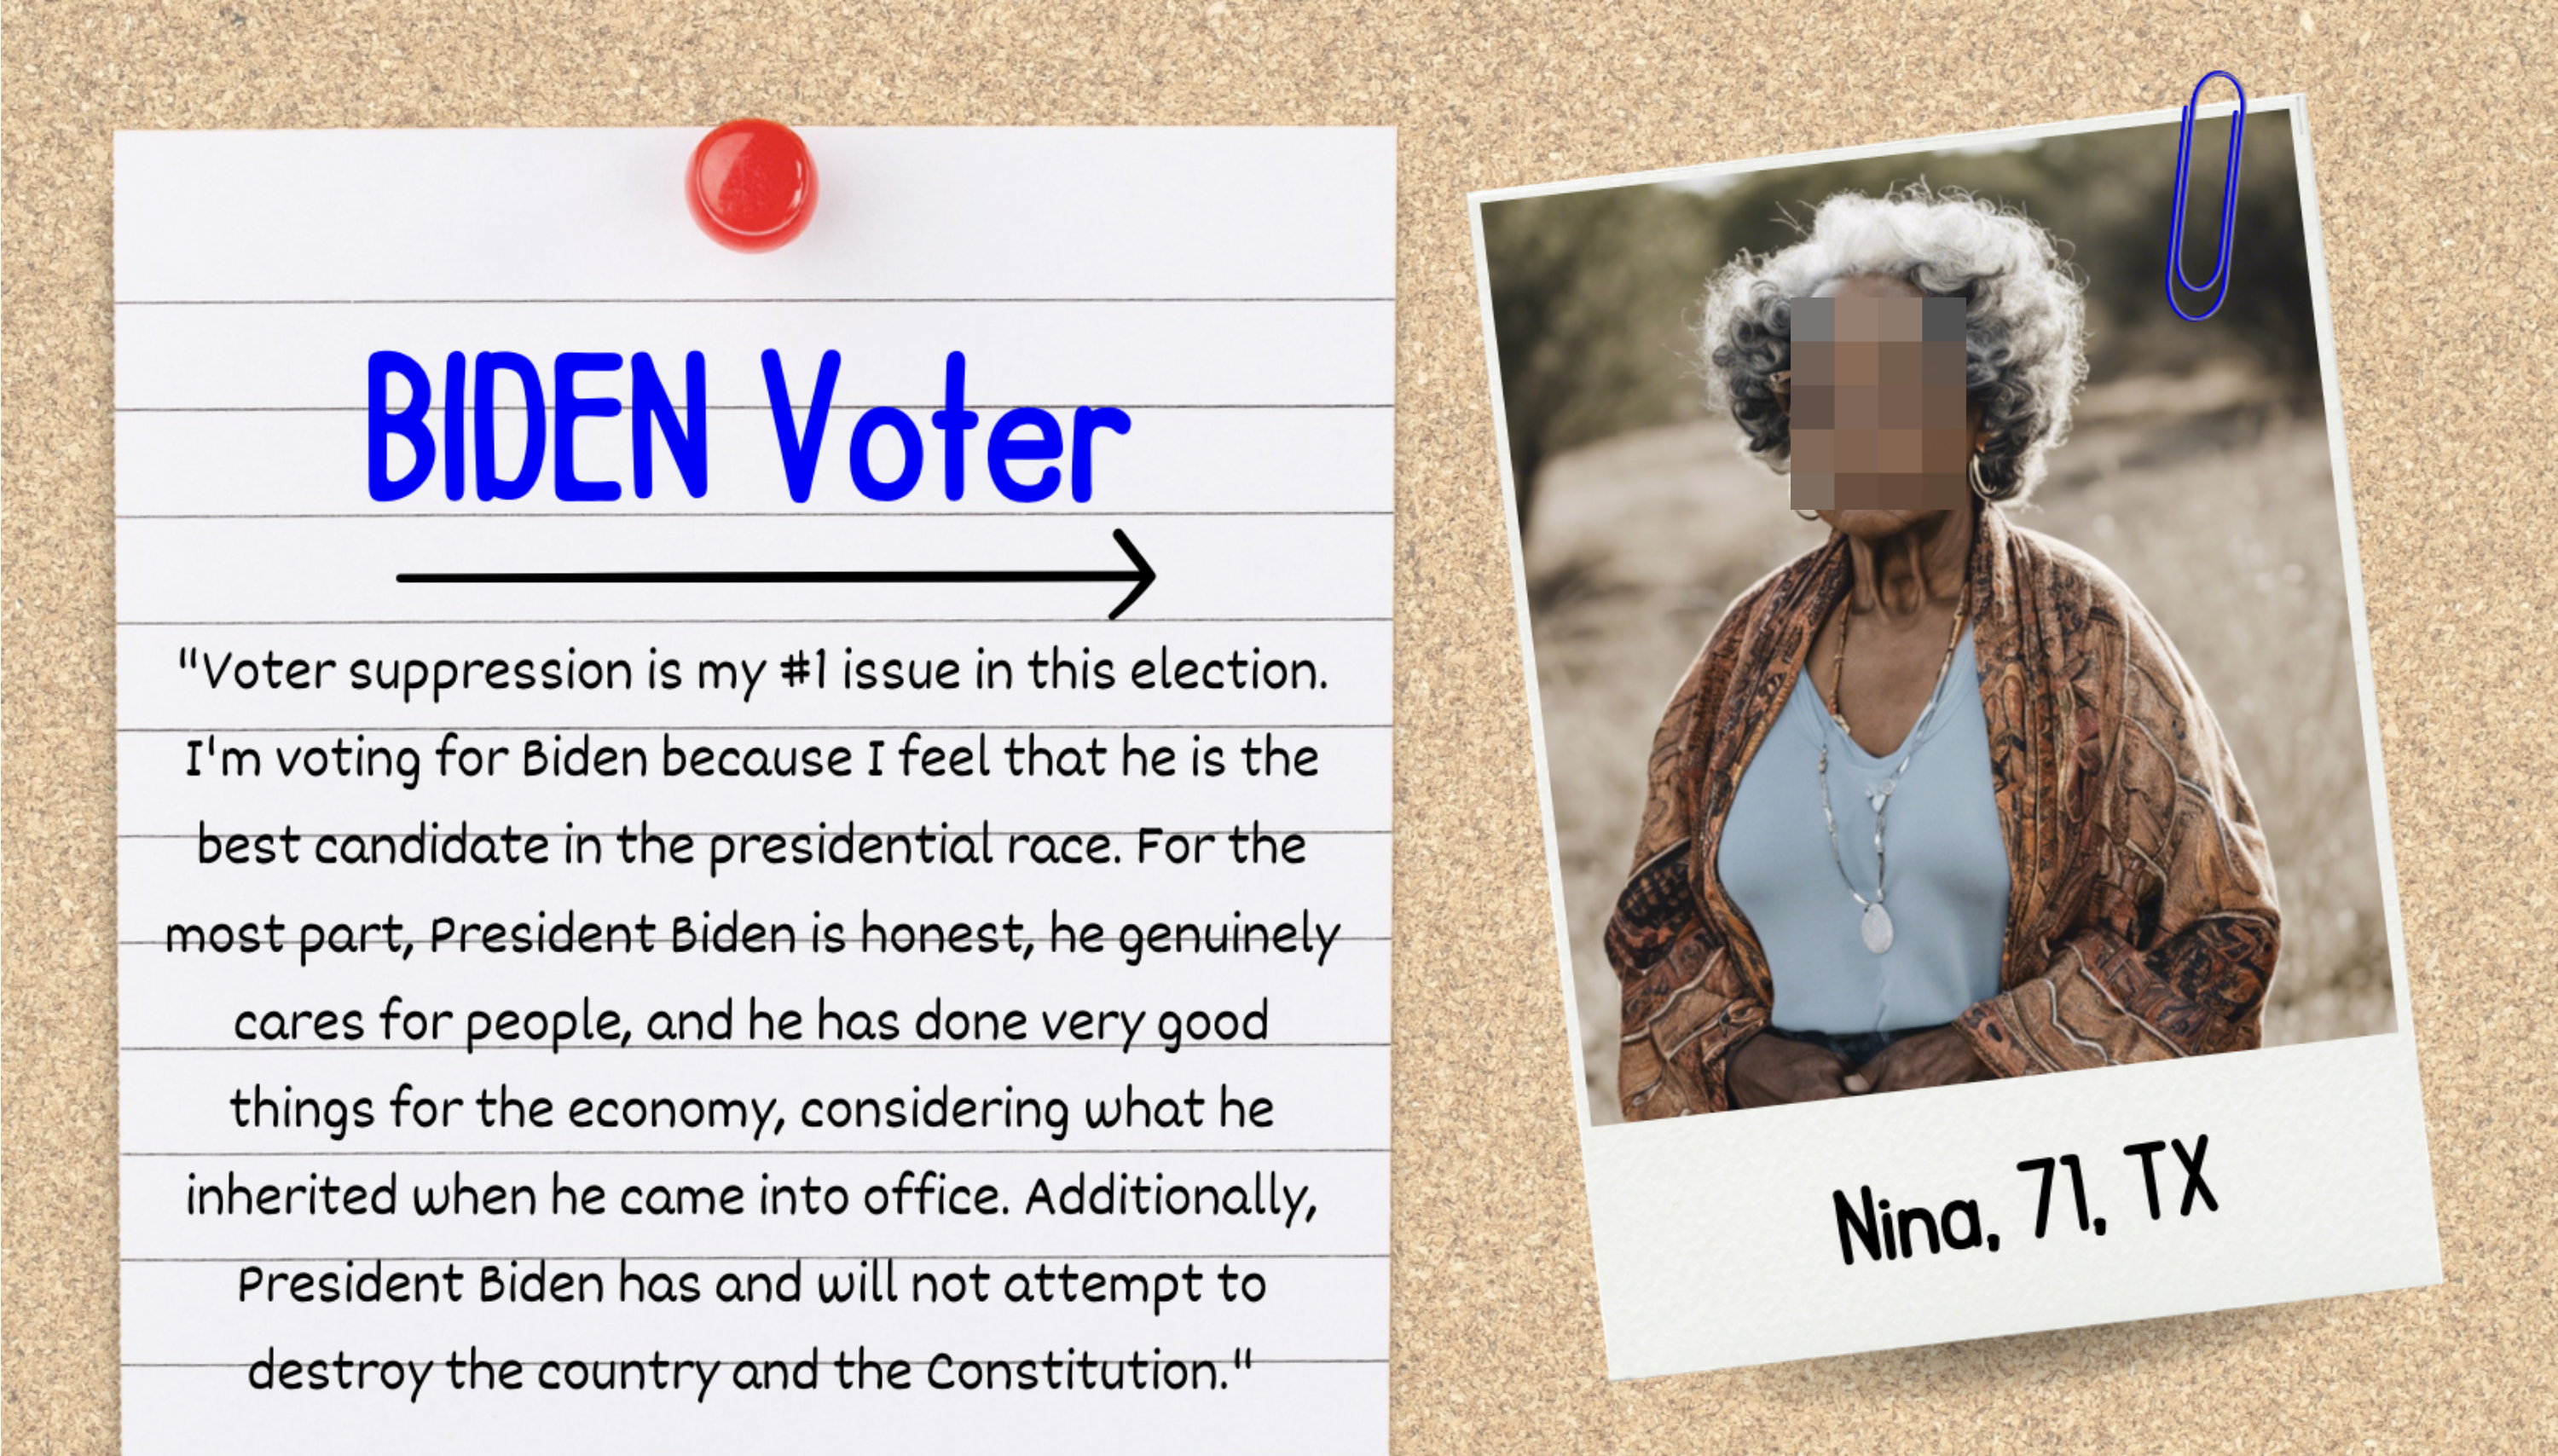 A note reads: &quot;BIDEN Voter: &#x27;Voter suppression is my #1 issue in this election. I&#x27;m voting for Biden because I feel that he is the best candidate...&#x27;&quot; A photo of Nina, 71, TX, is on the right